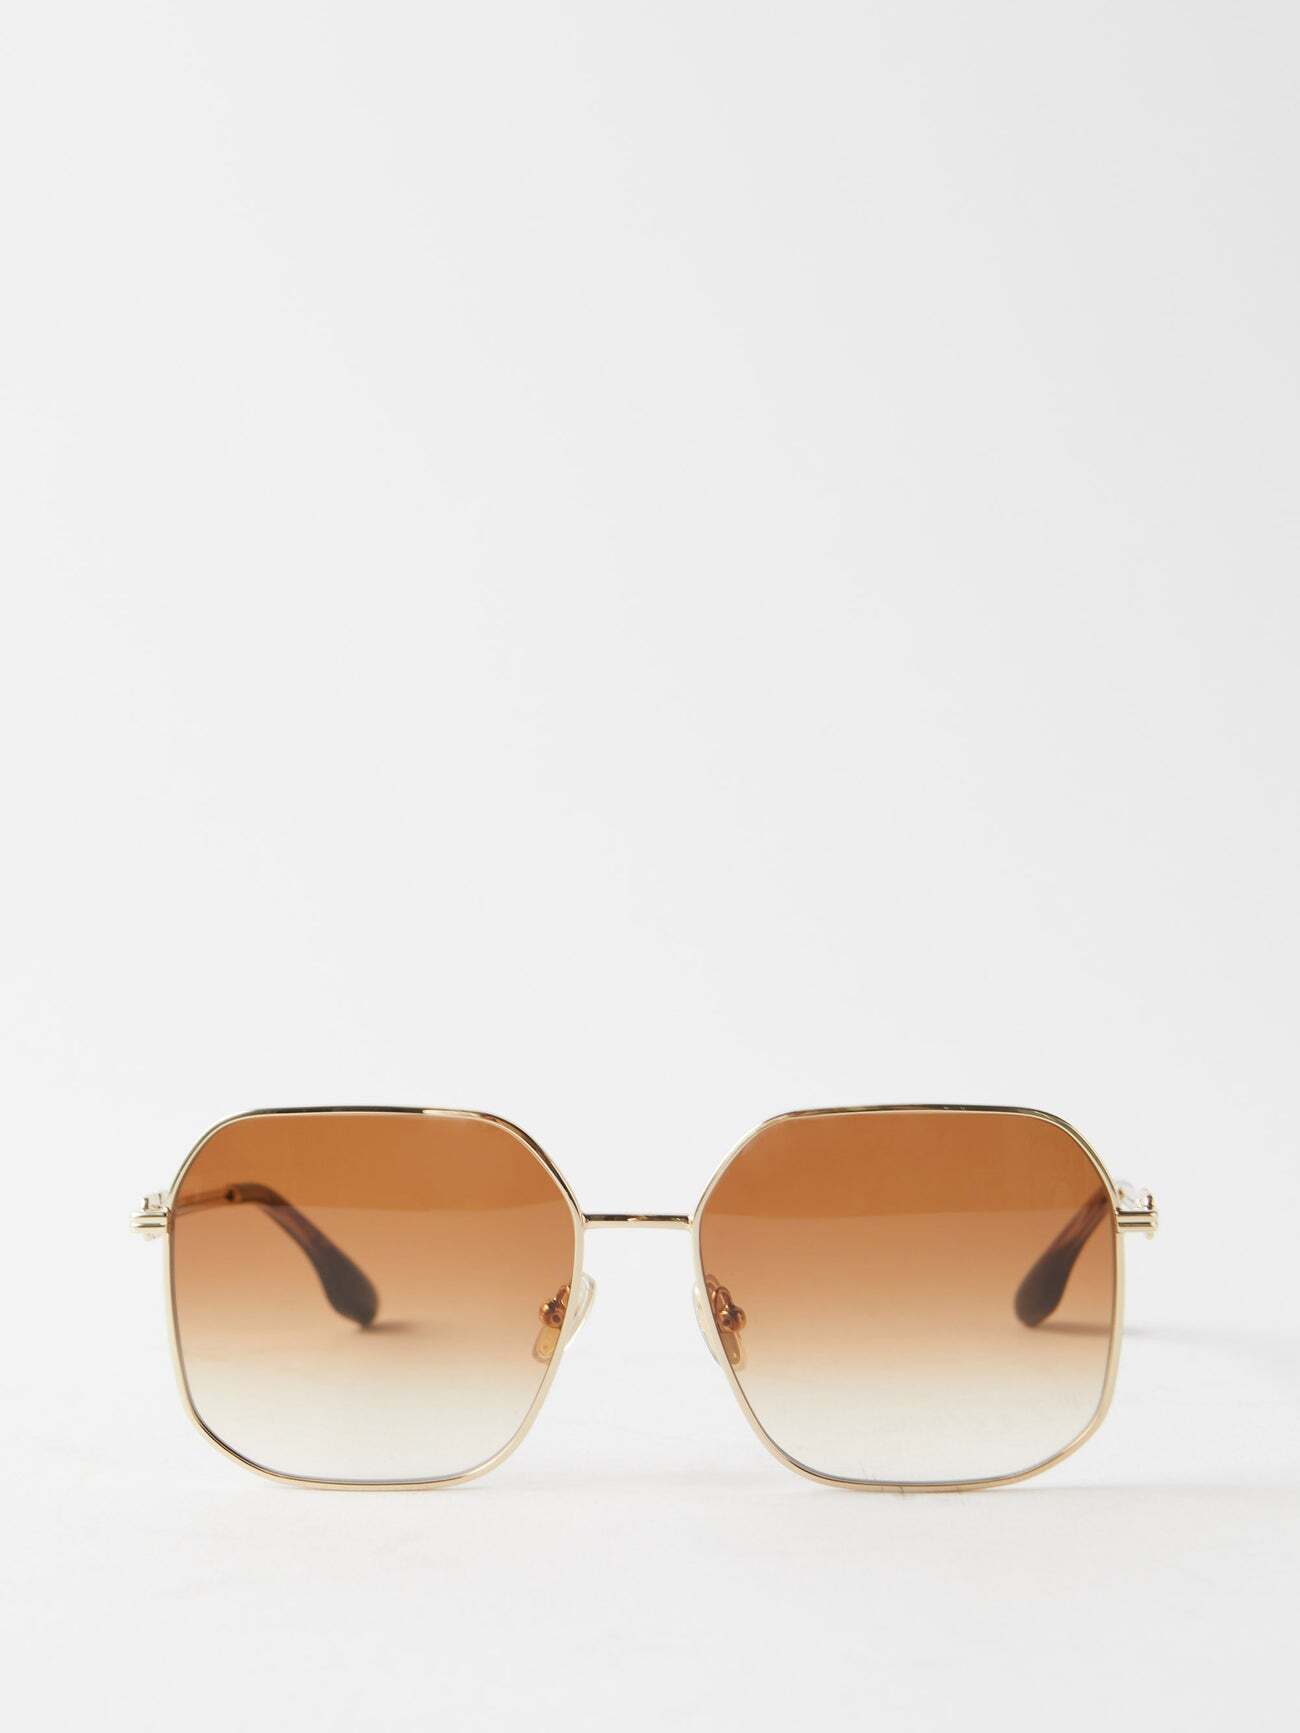 Victoria Beckham - Oversized Square Metal Sunglasses - Womens - Brown Gold